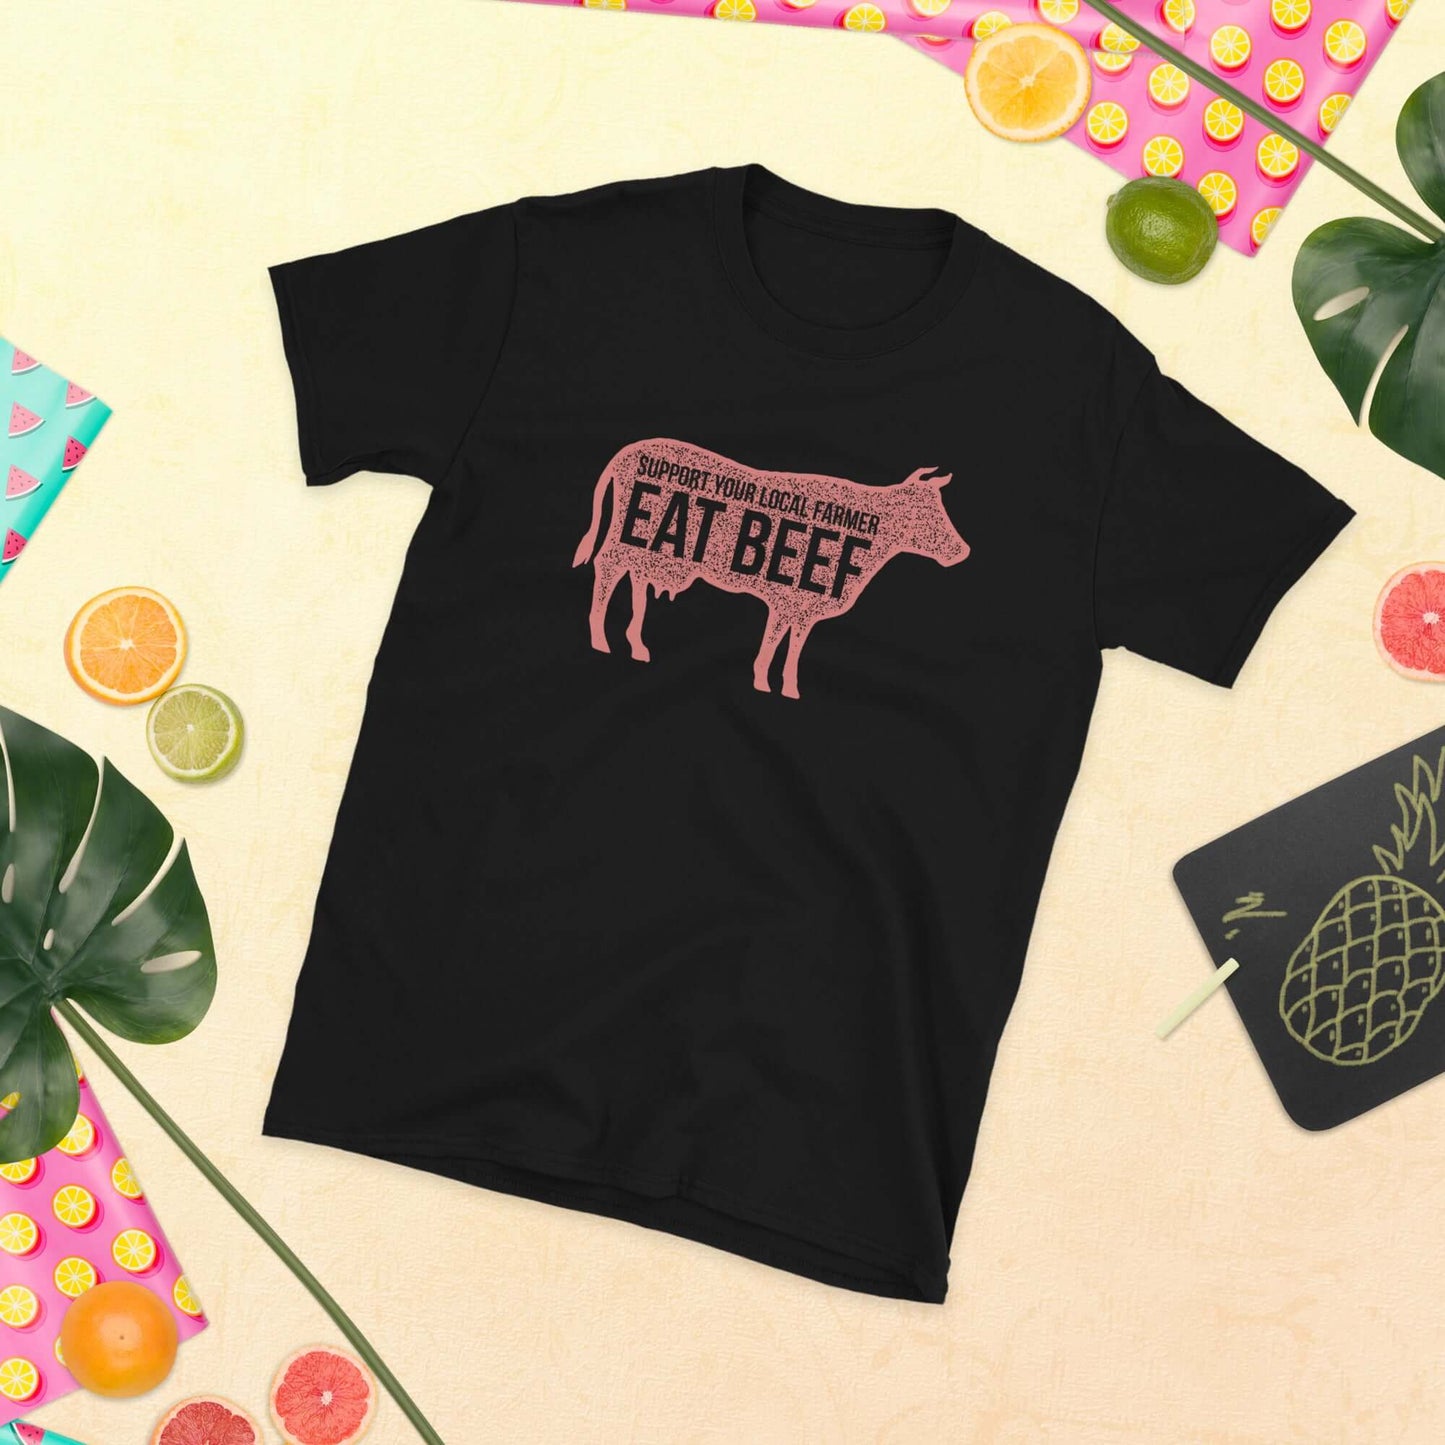 Support your Local Farmers Eat Beef  Short-Sleeve Unisex T-Shirt